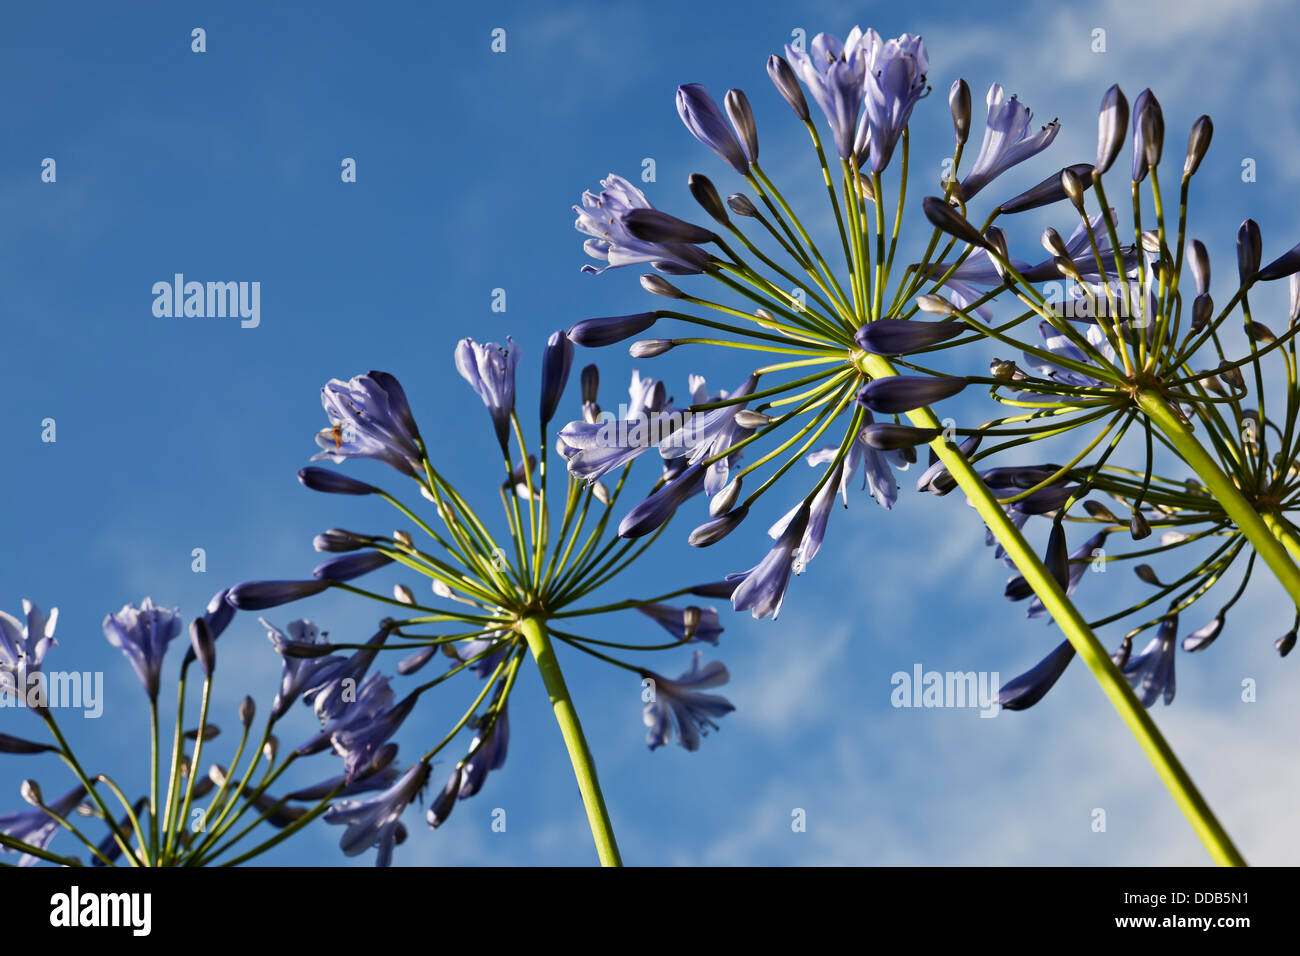 Close up of Blue agapanthus flowers flower flowering in summer England UK United Kingdom GB Great Britain Stock Photo